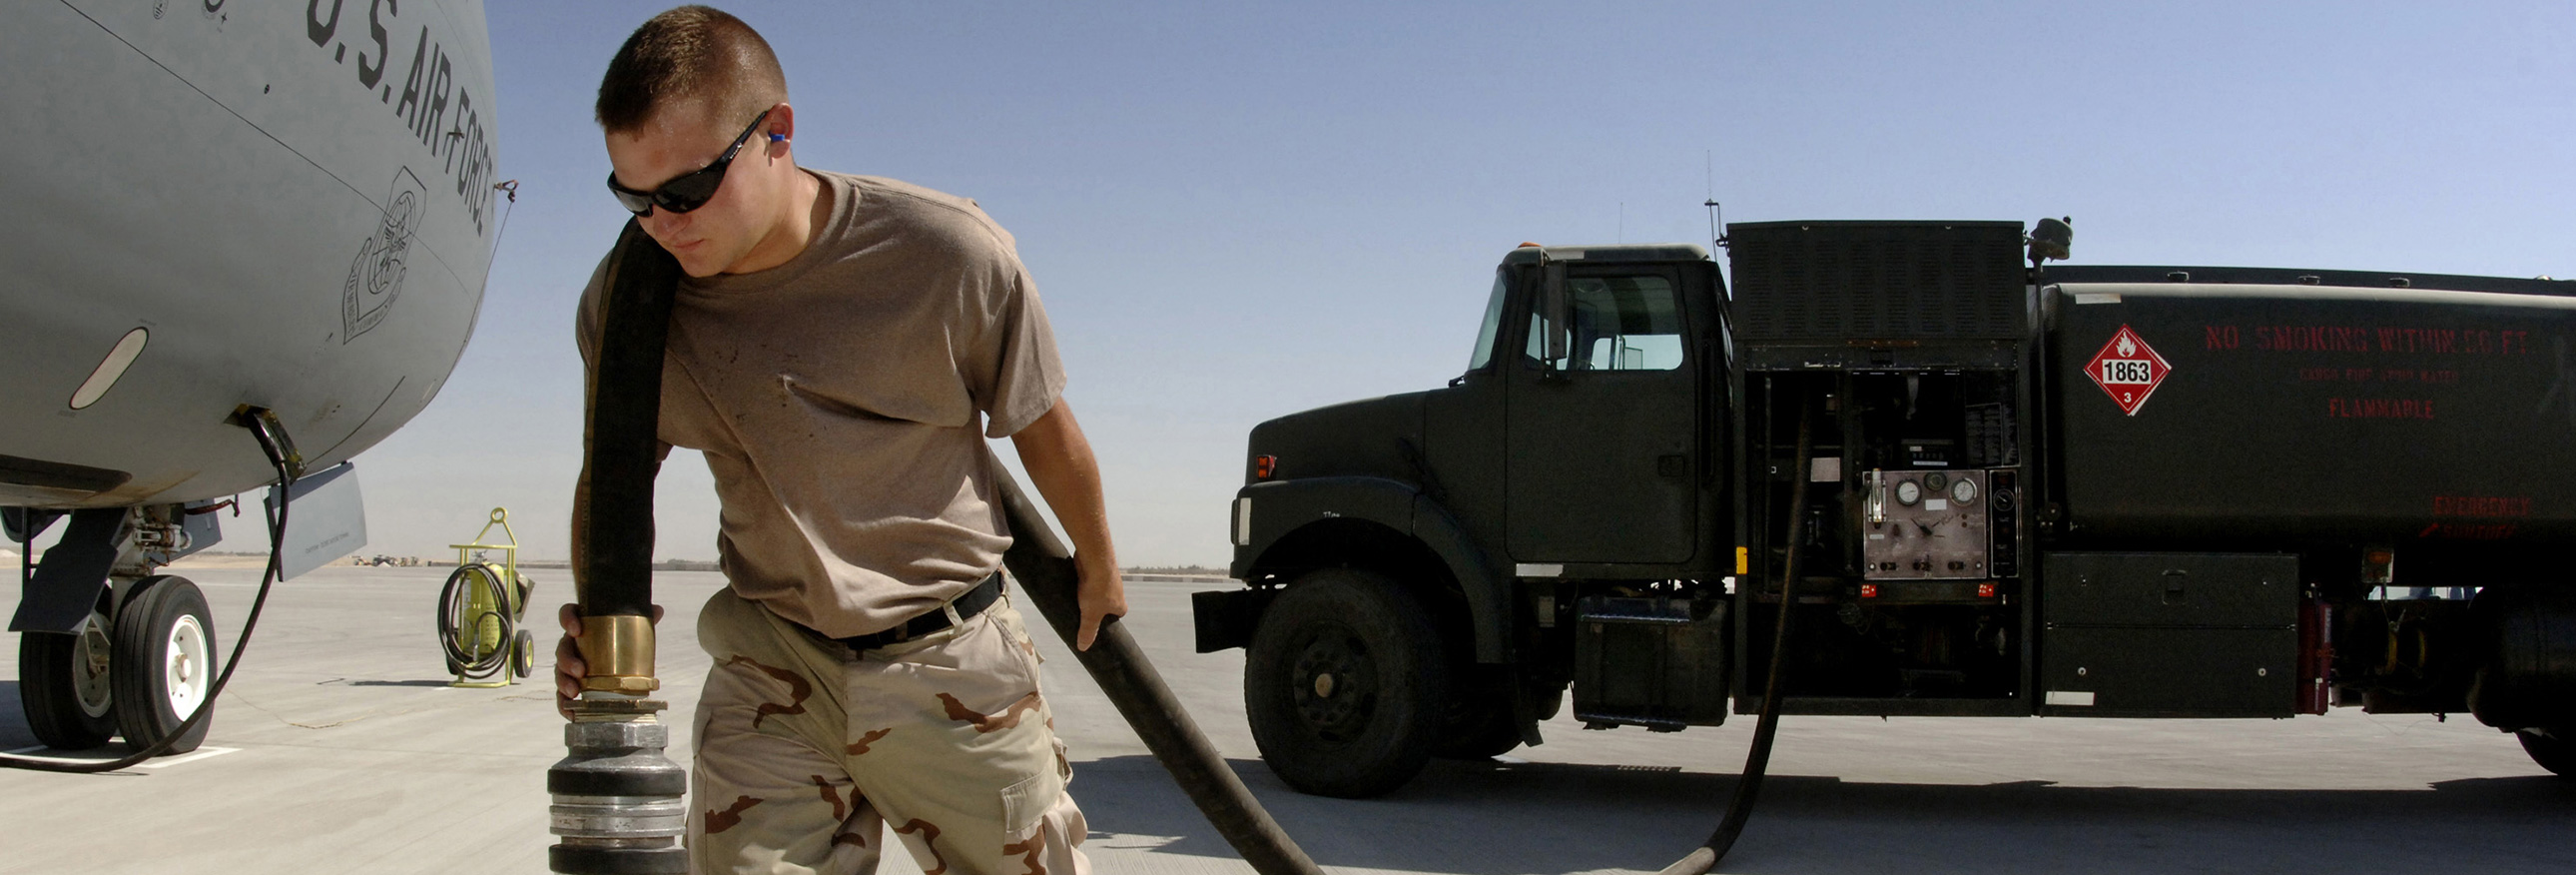 soldier pulling a hose from a gasoline truck on tarmac